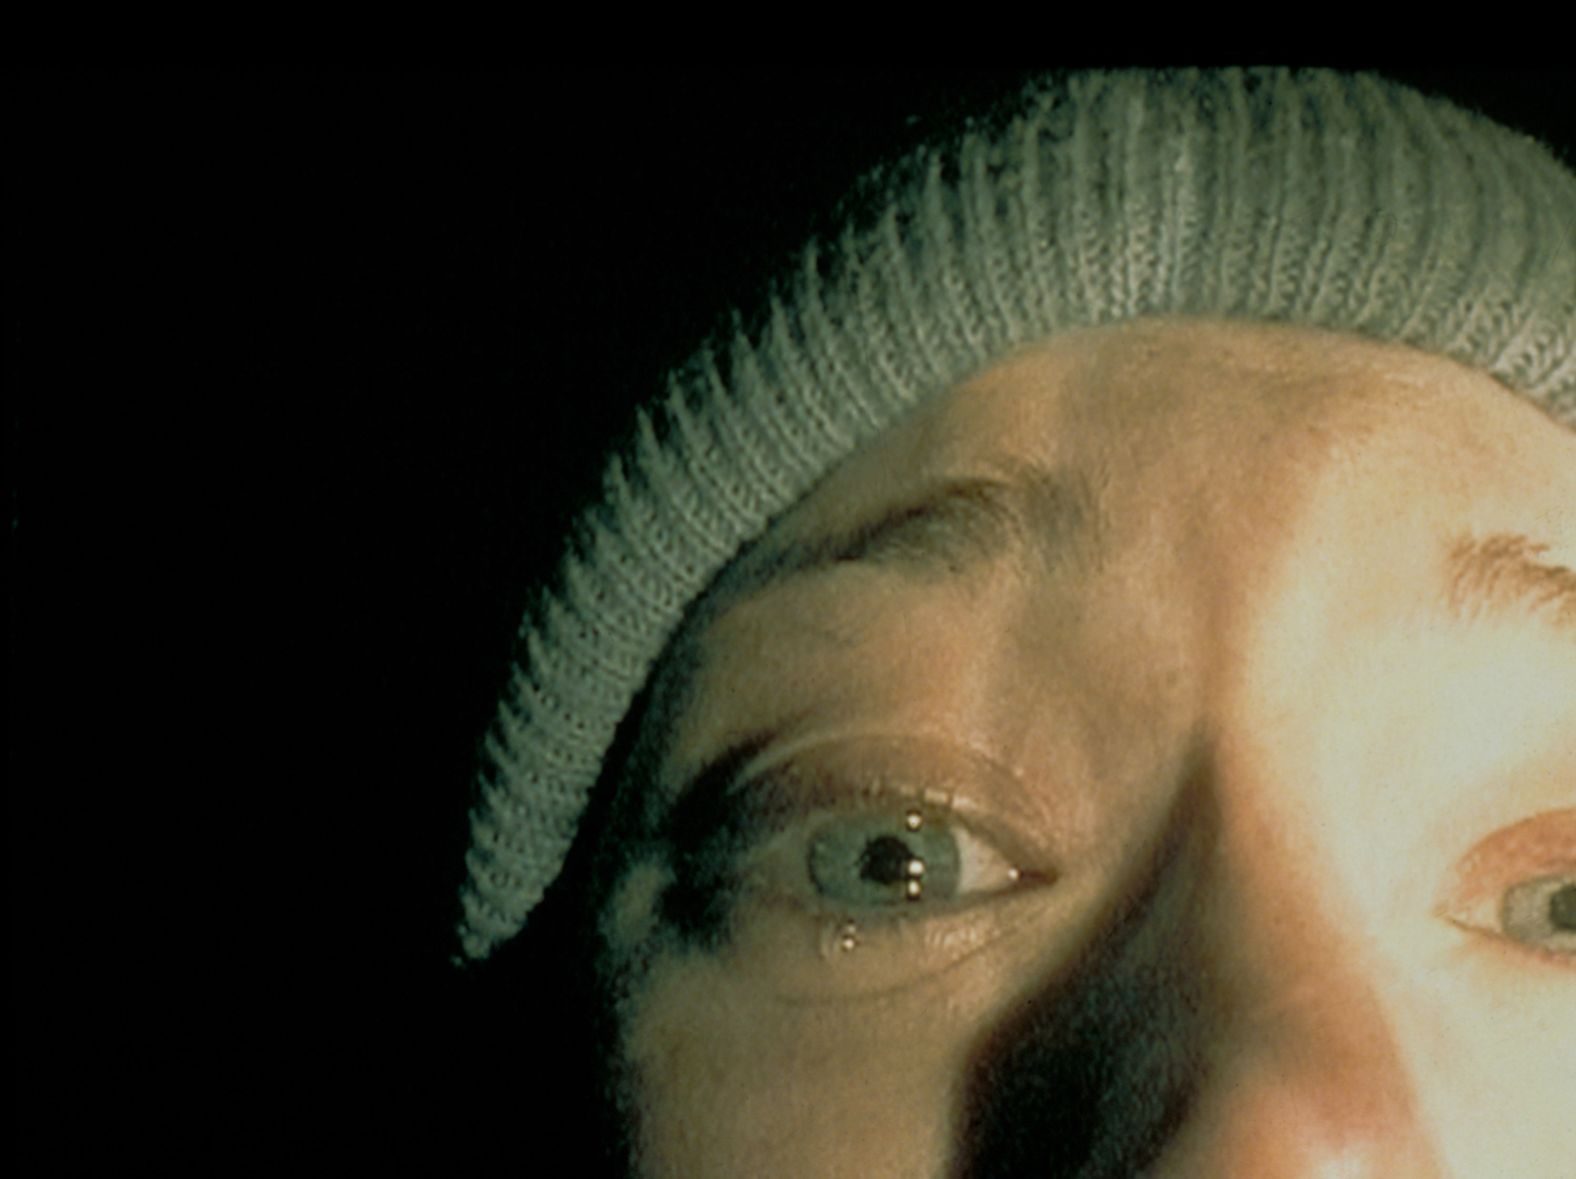 Heather Donahue in "The Blair Witch Project"